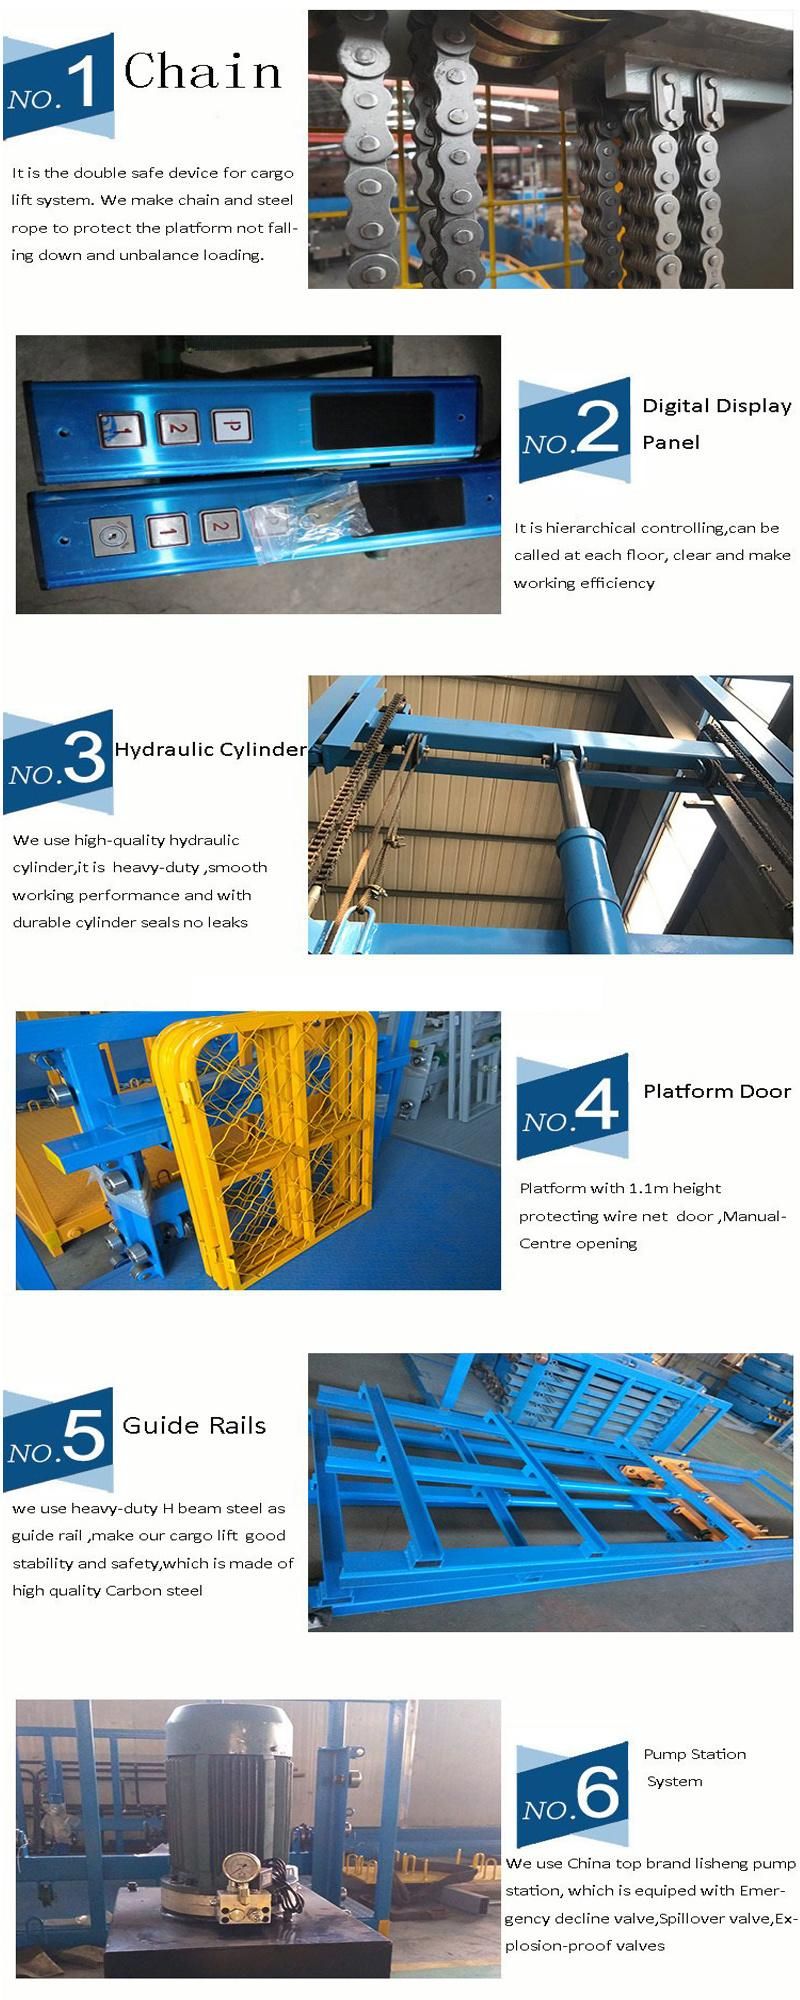 300kg 500kg 800kg 1000kg Customized Hydraulic Freight Elevator Warehouse Electric Small Goods Lift Price